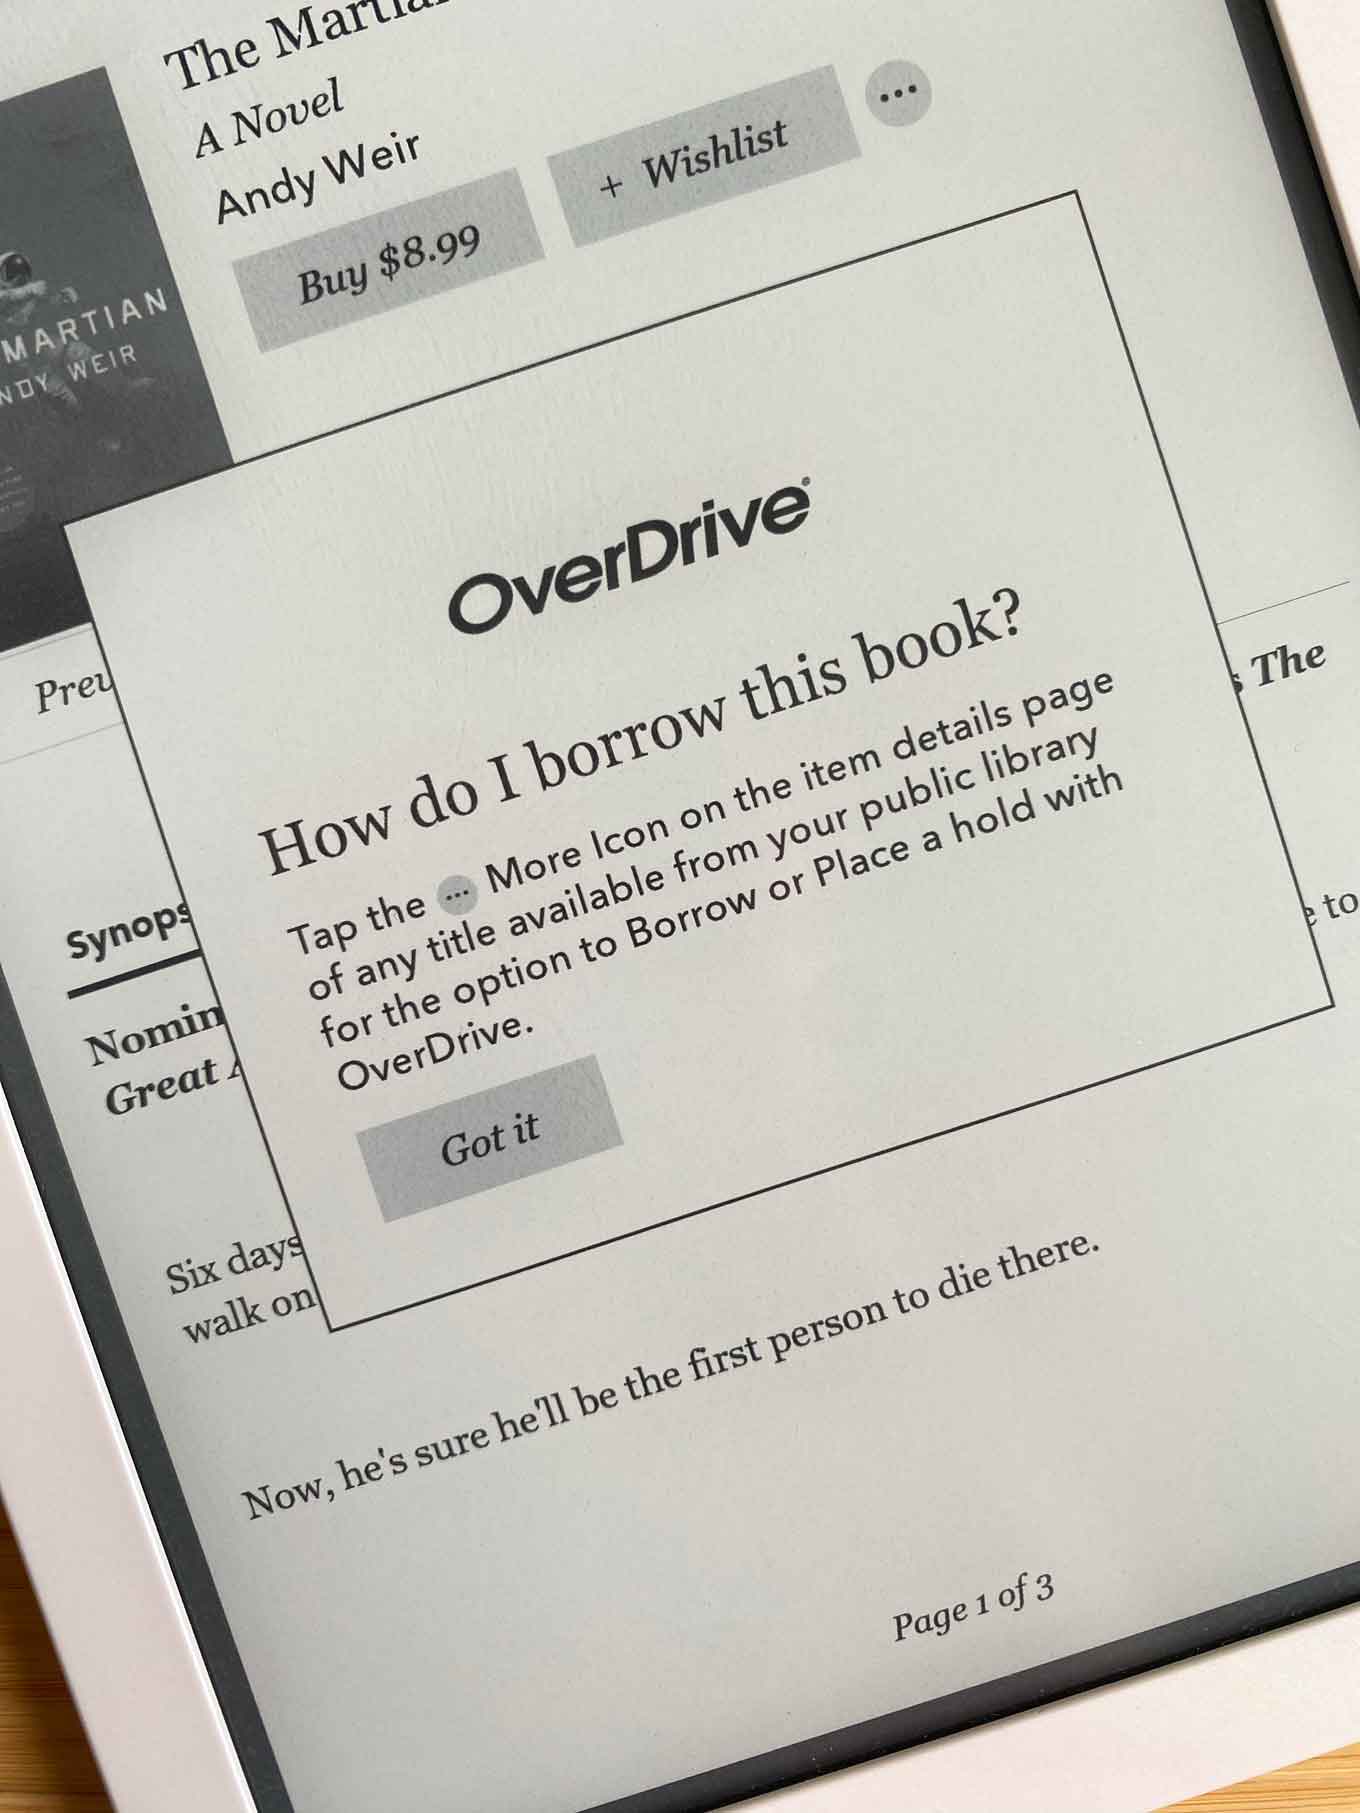 Text on Kobo e-reader: Tap the [...] More Icon on the item details page of any title available from your public library for the option to Borrow or Place a hold with OverDrive